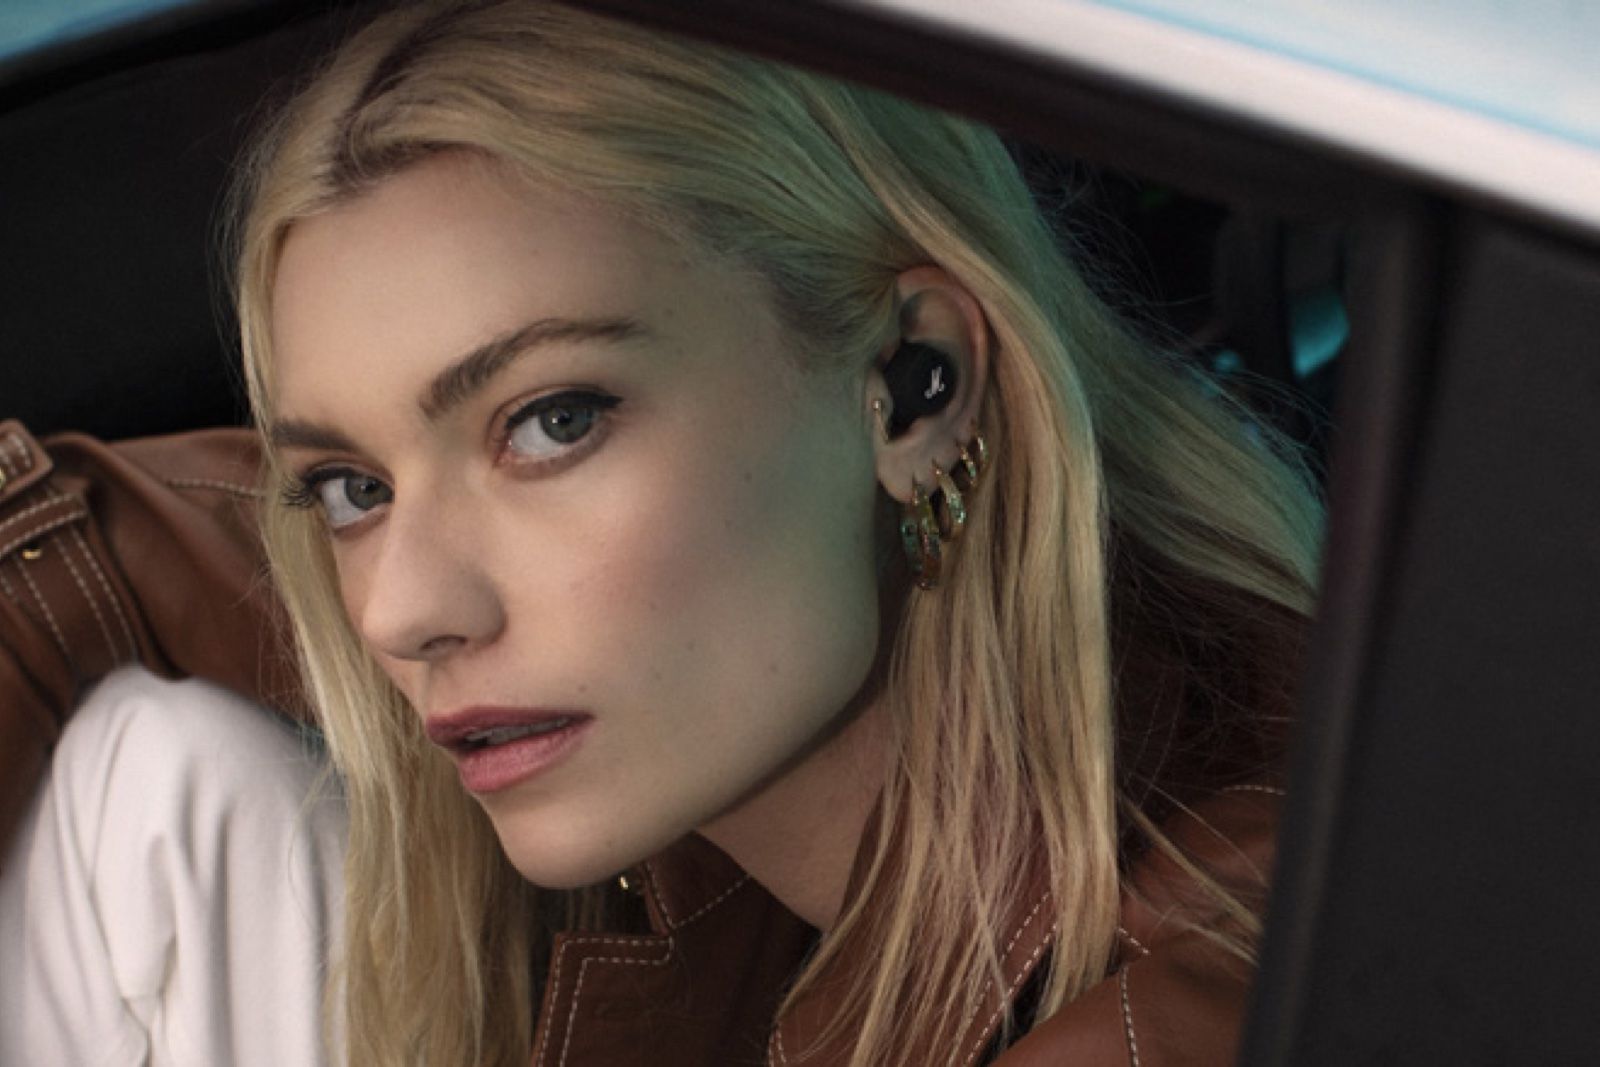 Marshall's first true wireless earphones are the Mode II photo 1